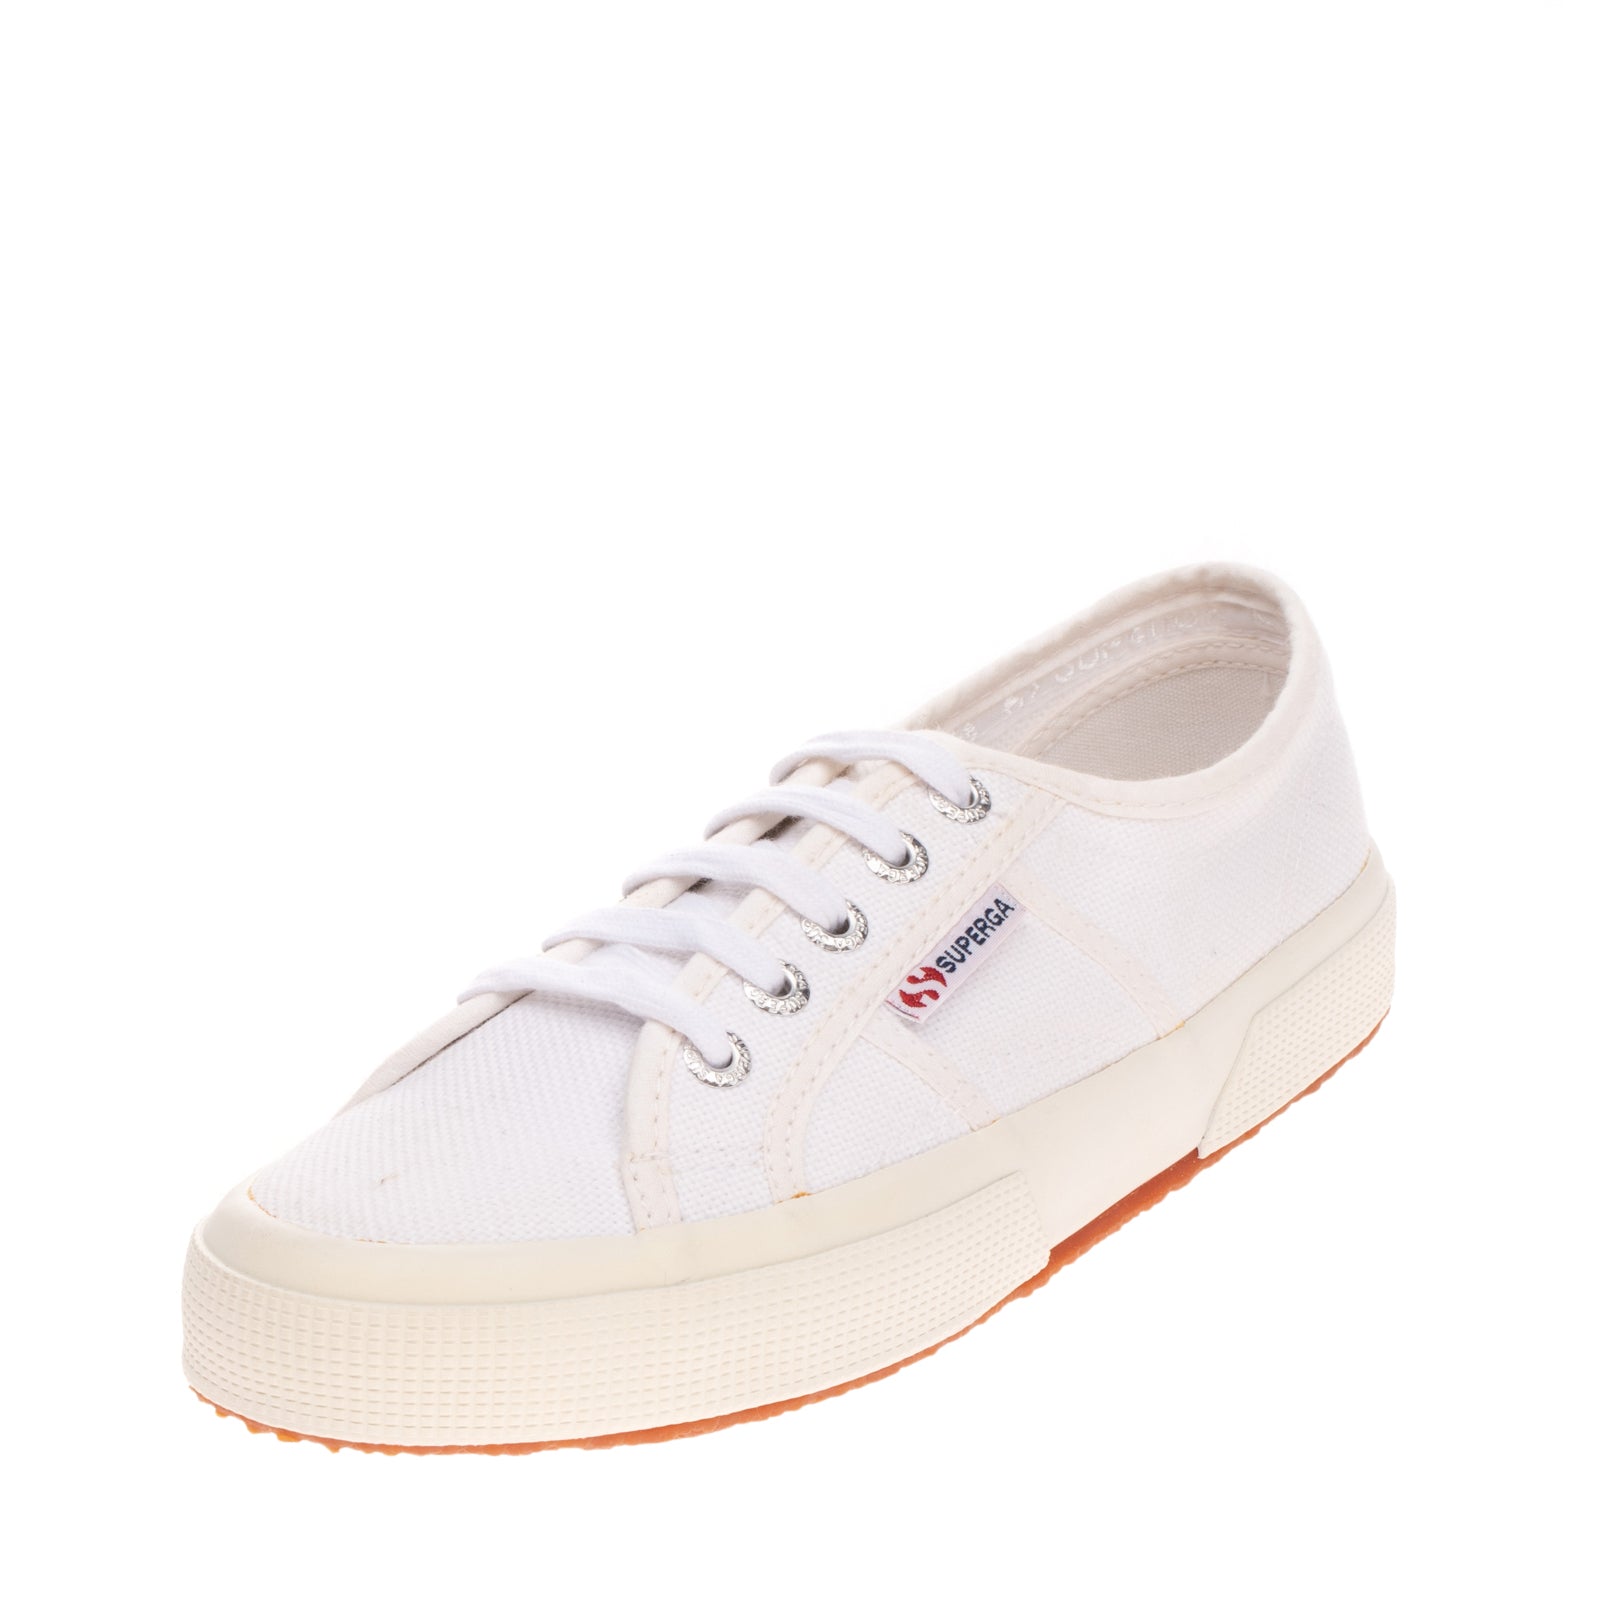 SUPERGA Canvas Sneakers Size 37 UK 4 US 6.5 Logo Patch Lace Up Crepe Sole gallery main photo